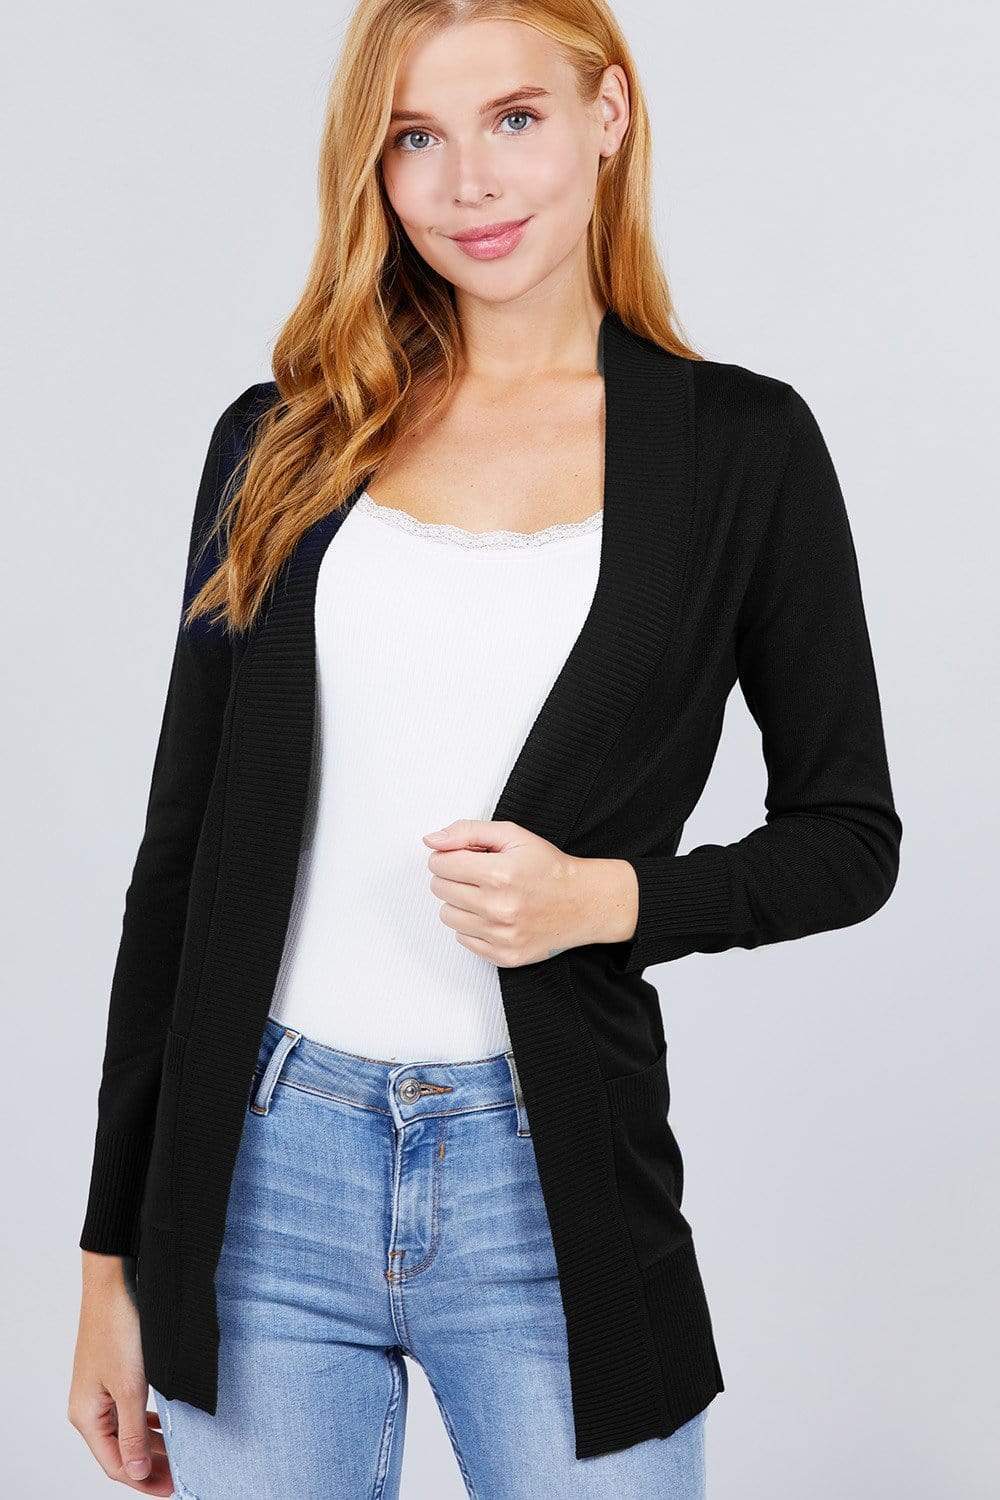 Long Sleeve Rib Banded Open Sweater Cardigan With Pockets-TOPS / DRESSES-[Adult]-[Female]-Black-S-Blue Zone Planet